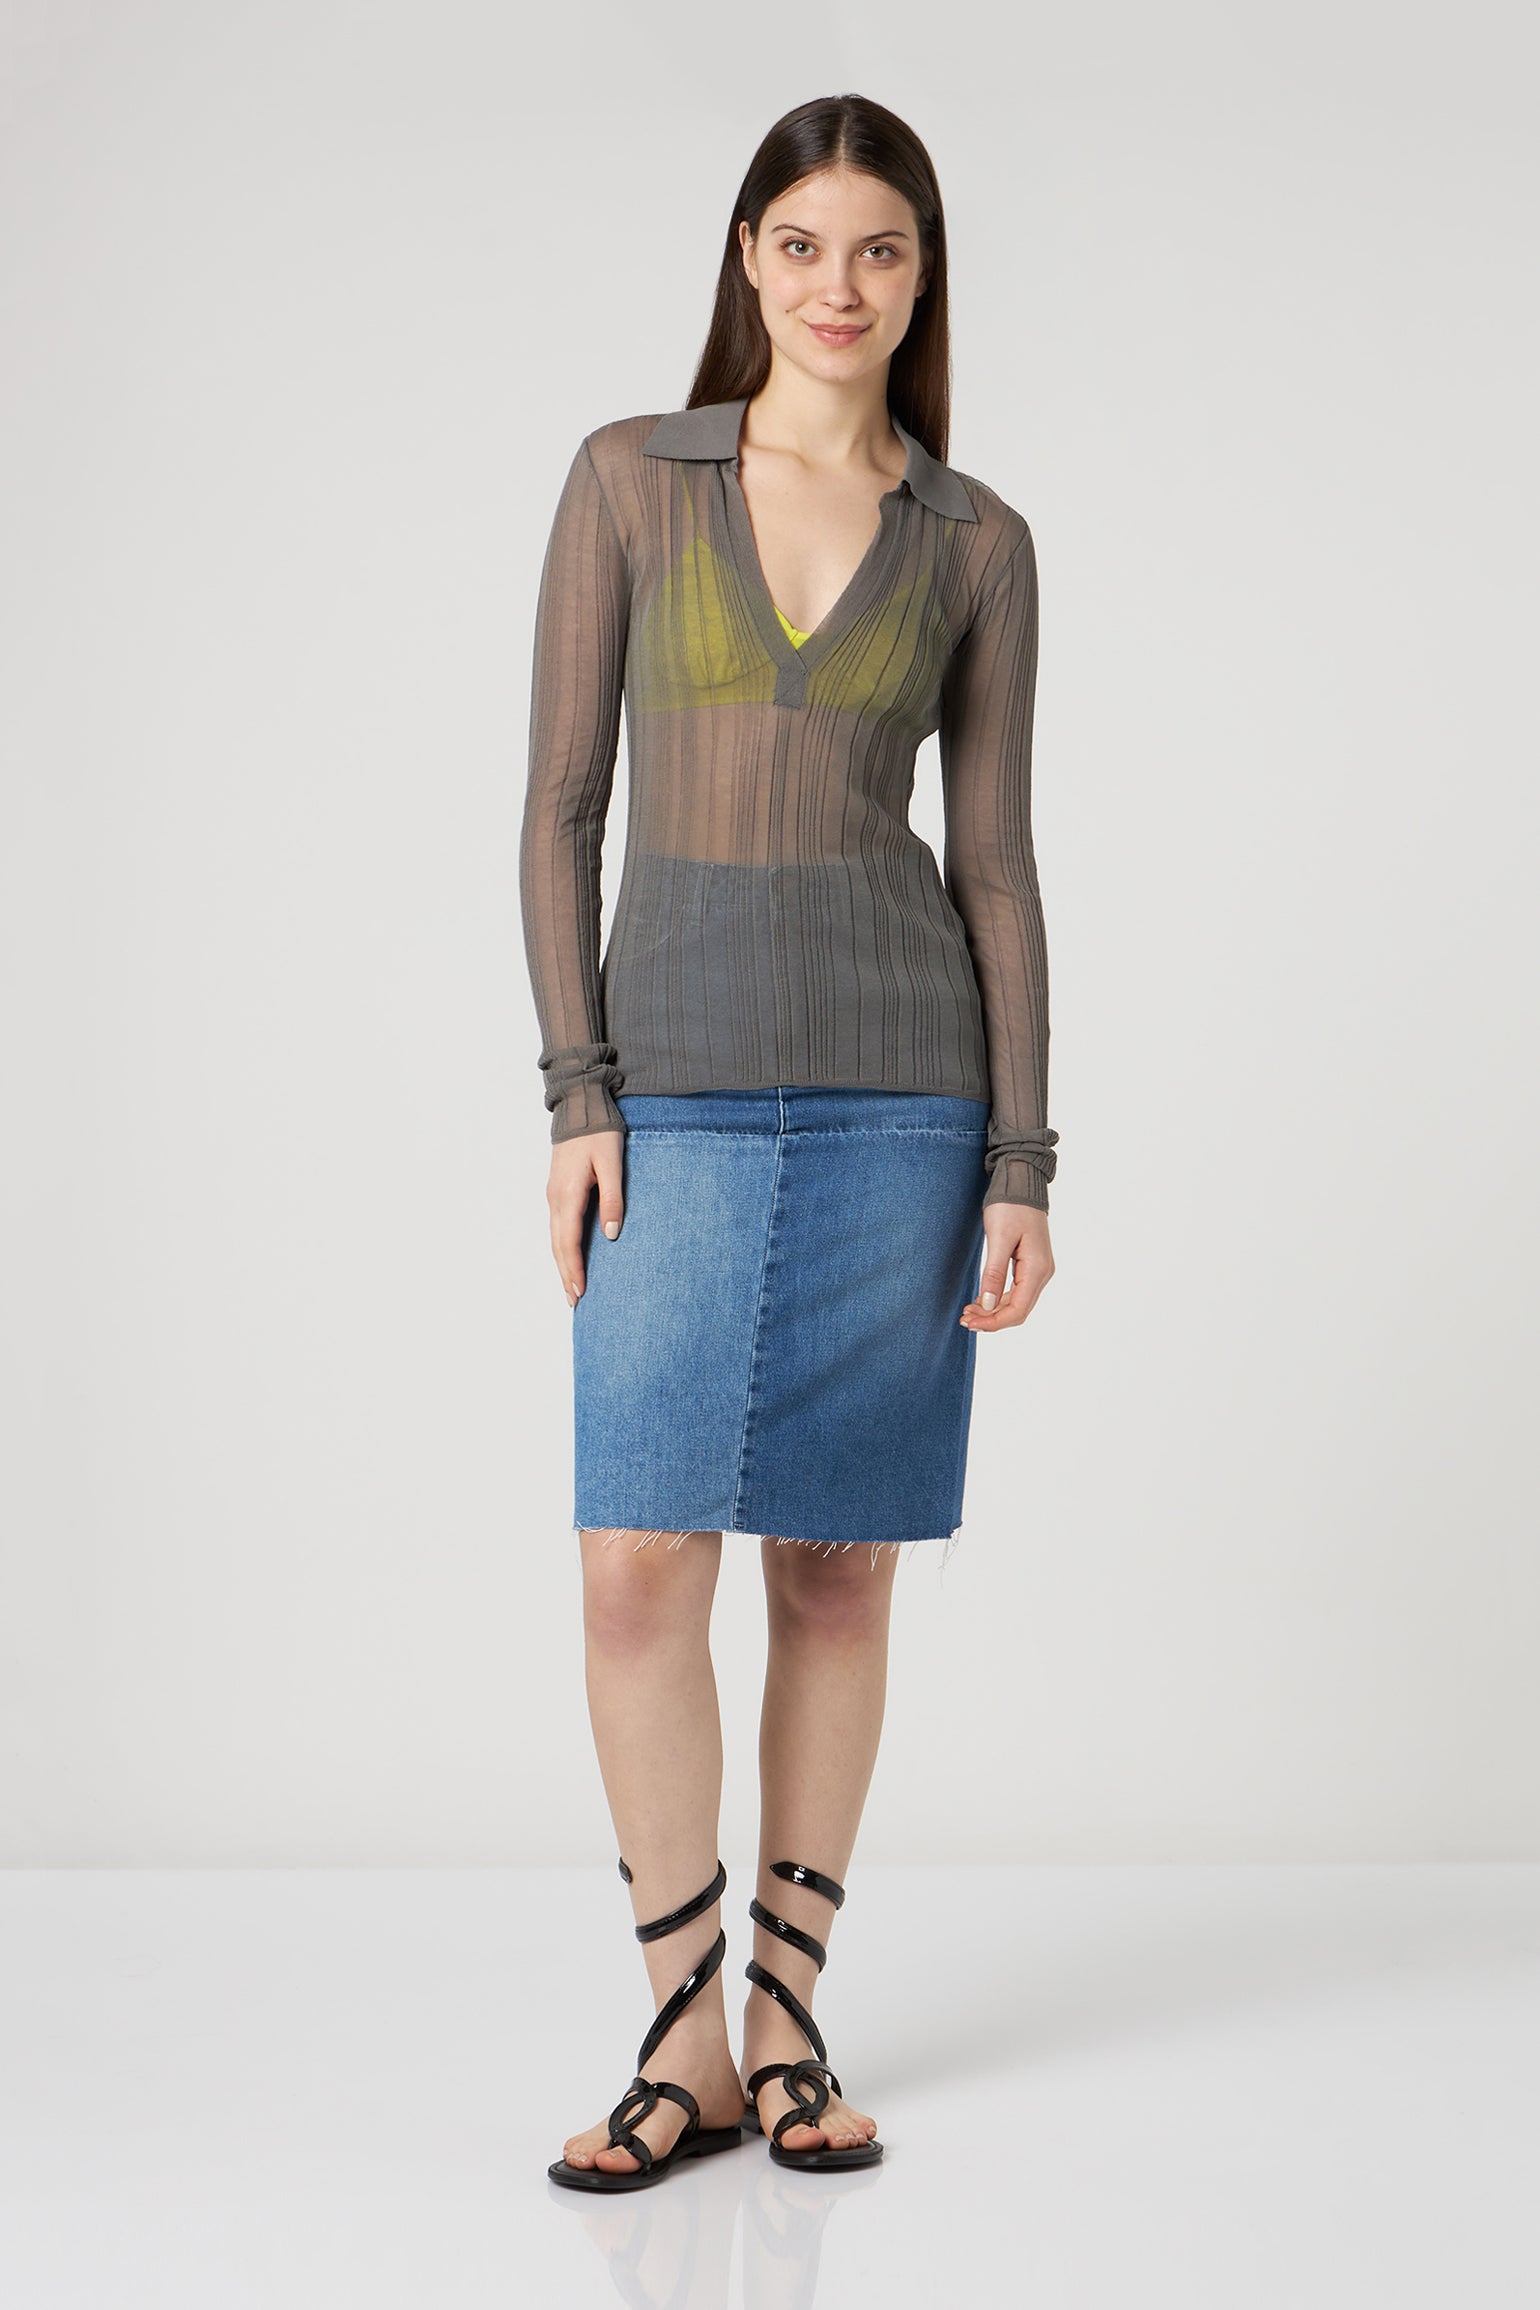 PATRIZIA PEPE Gray Ribbed Sweater with Fluo Top